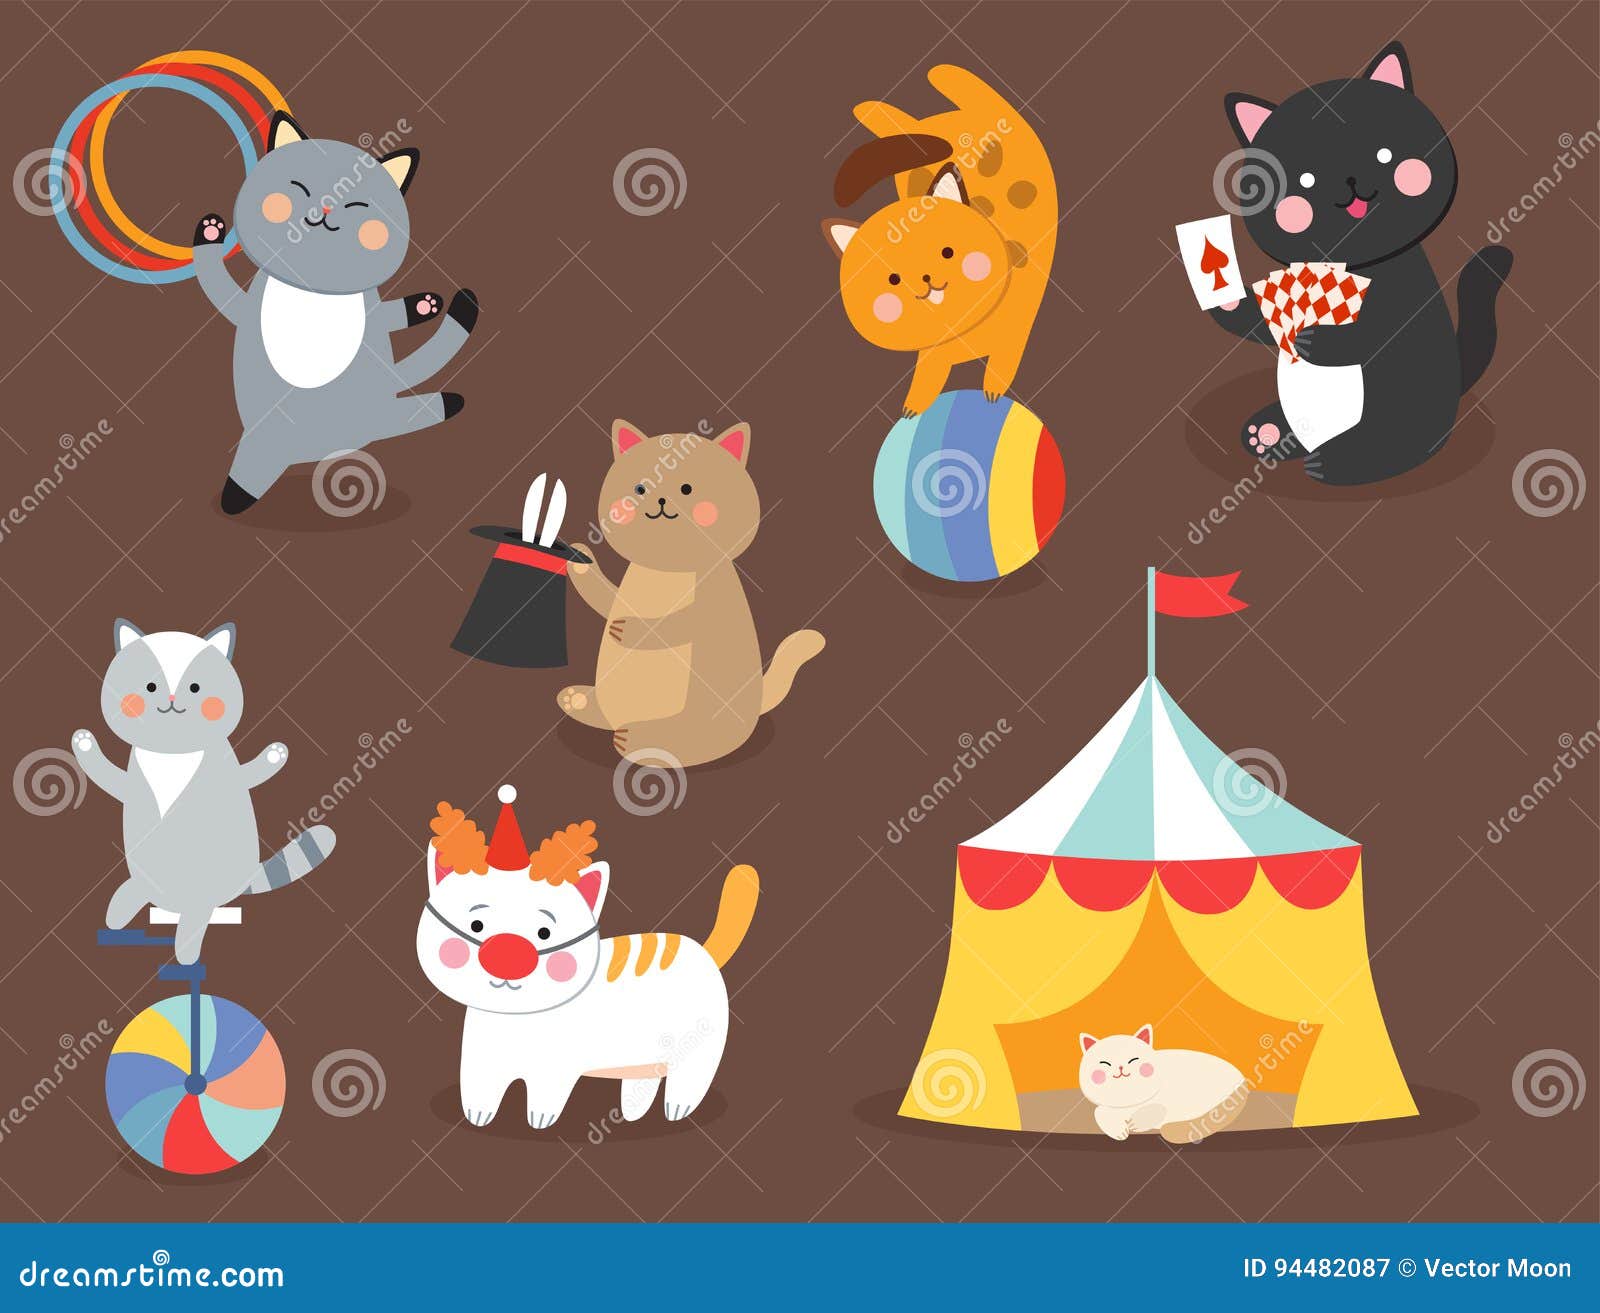 Circus Cats Vector Cheerful Illustration For Kids With Little Domestic ...